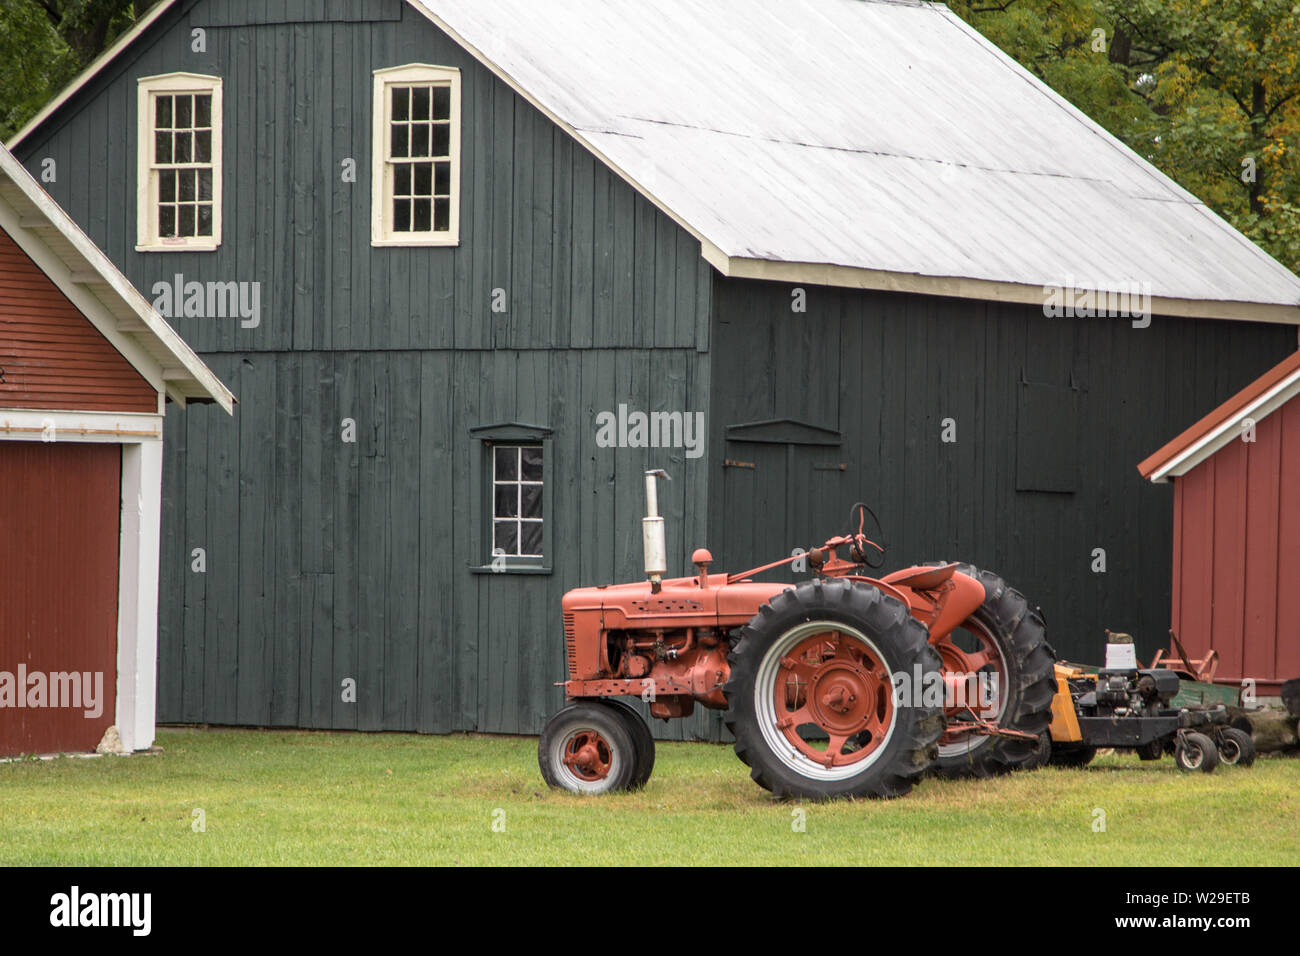 Farming Background. Red antique tractor and traditional barn in the American Midwest. Stock Photo